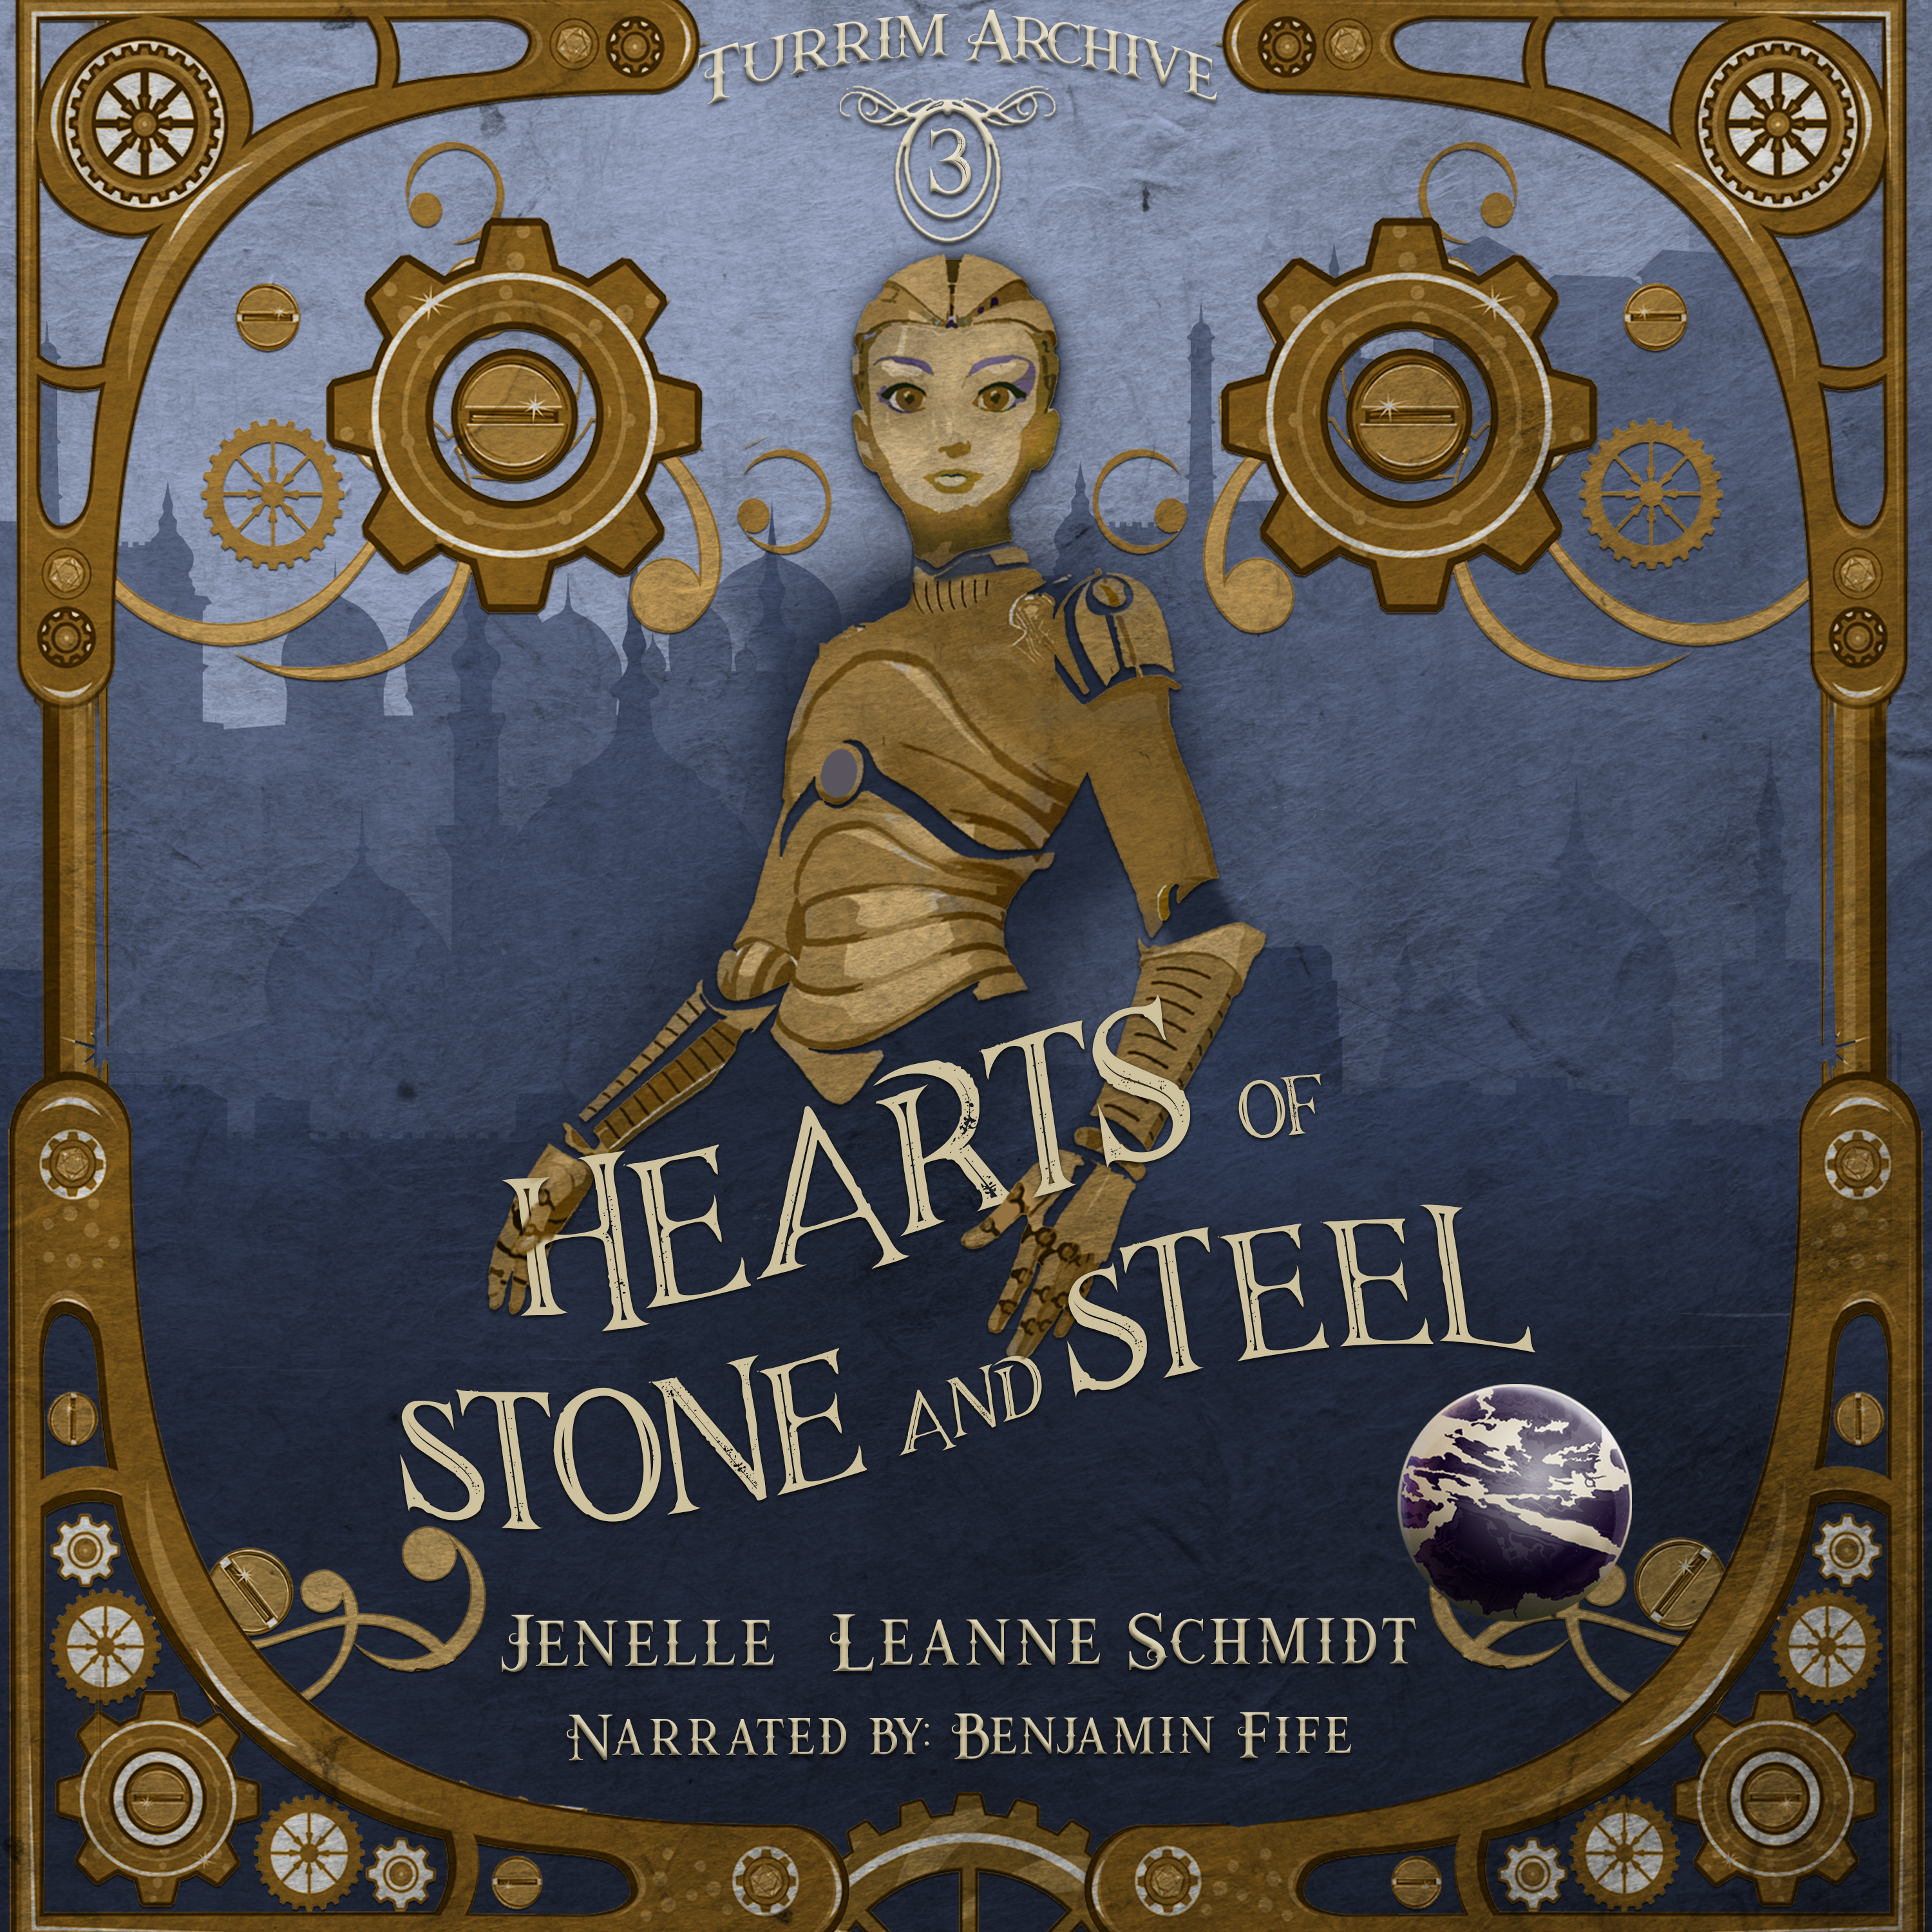 Pre-order Hearts of Stone and Steel thumbnail